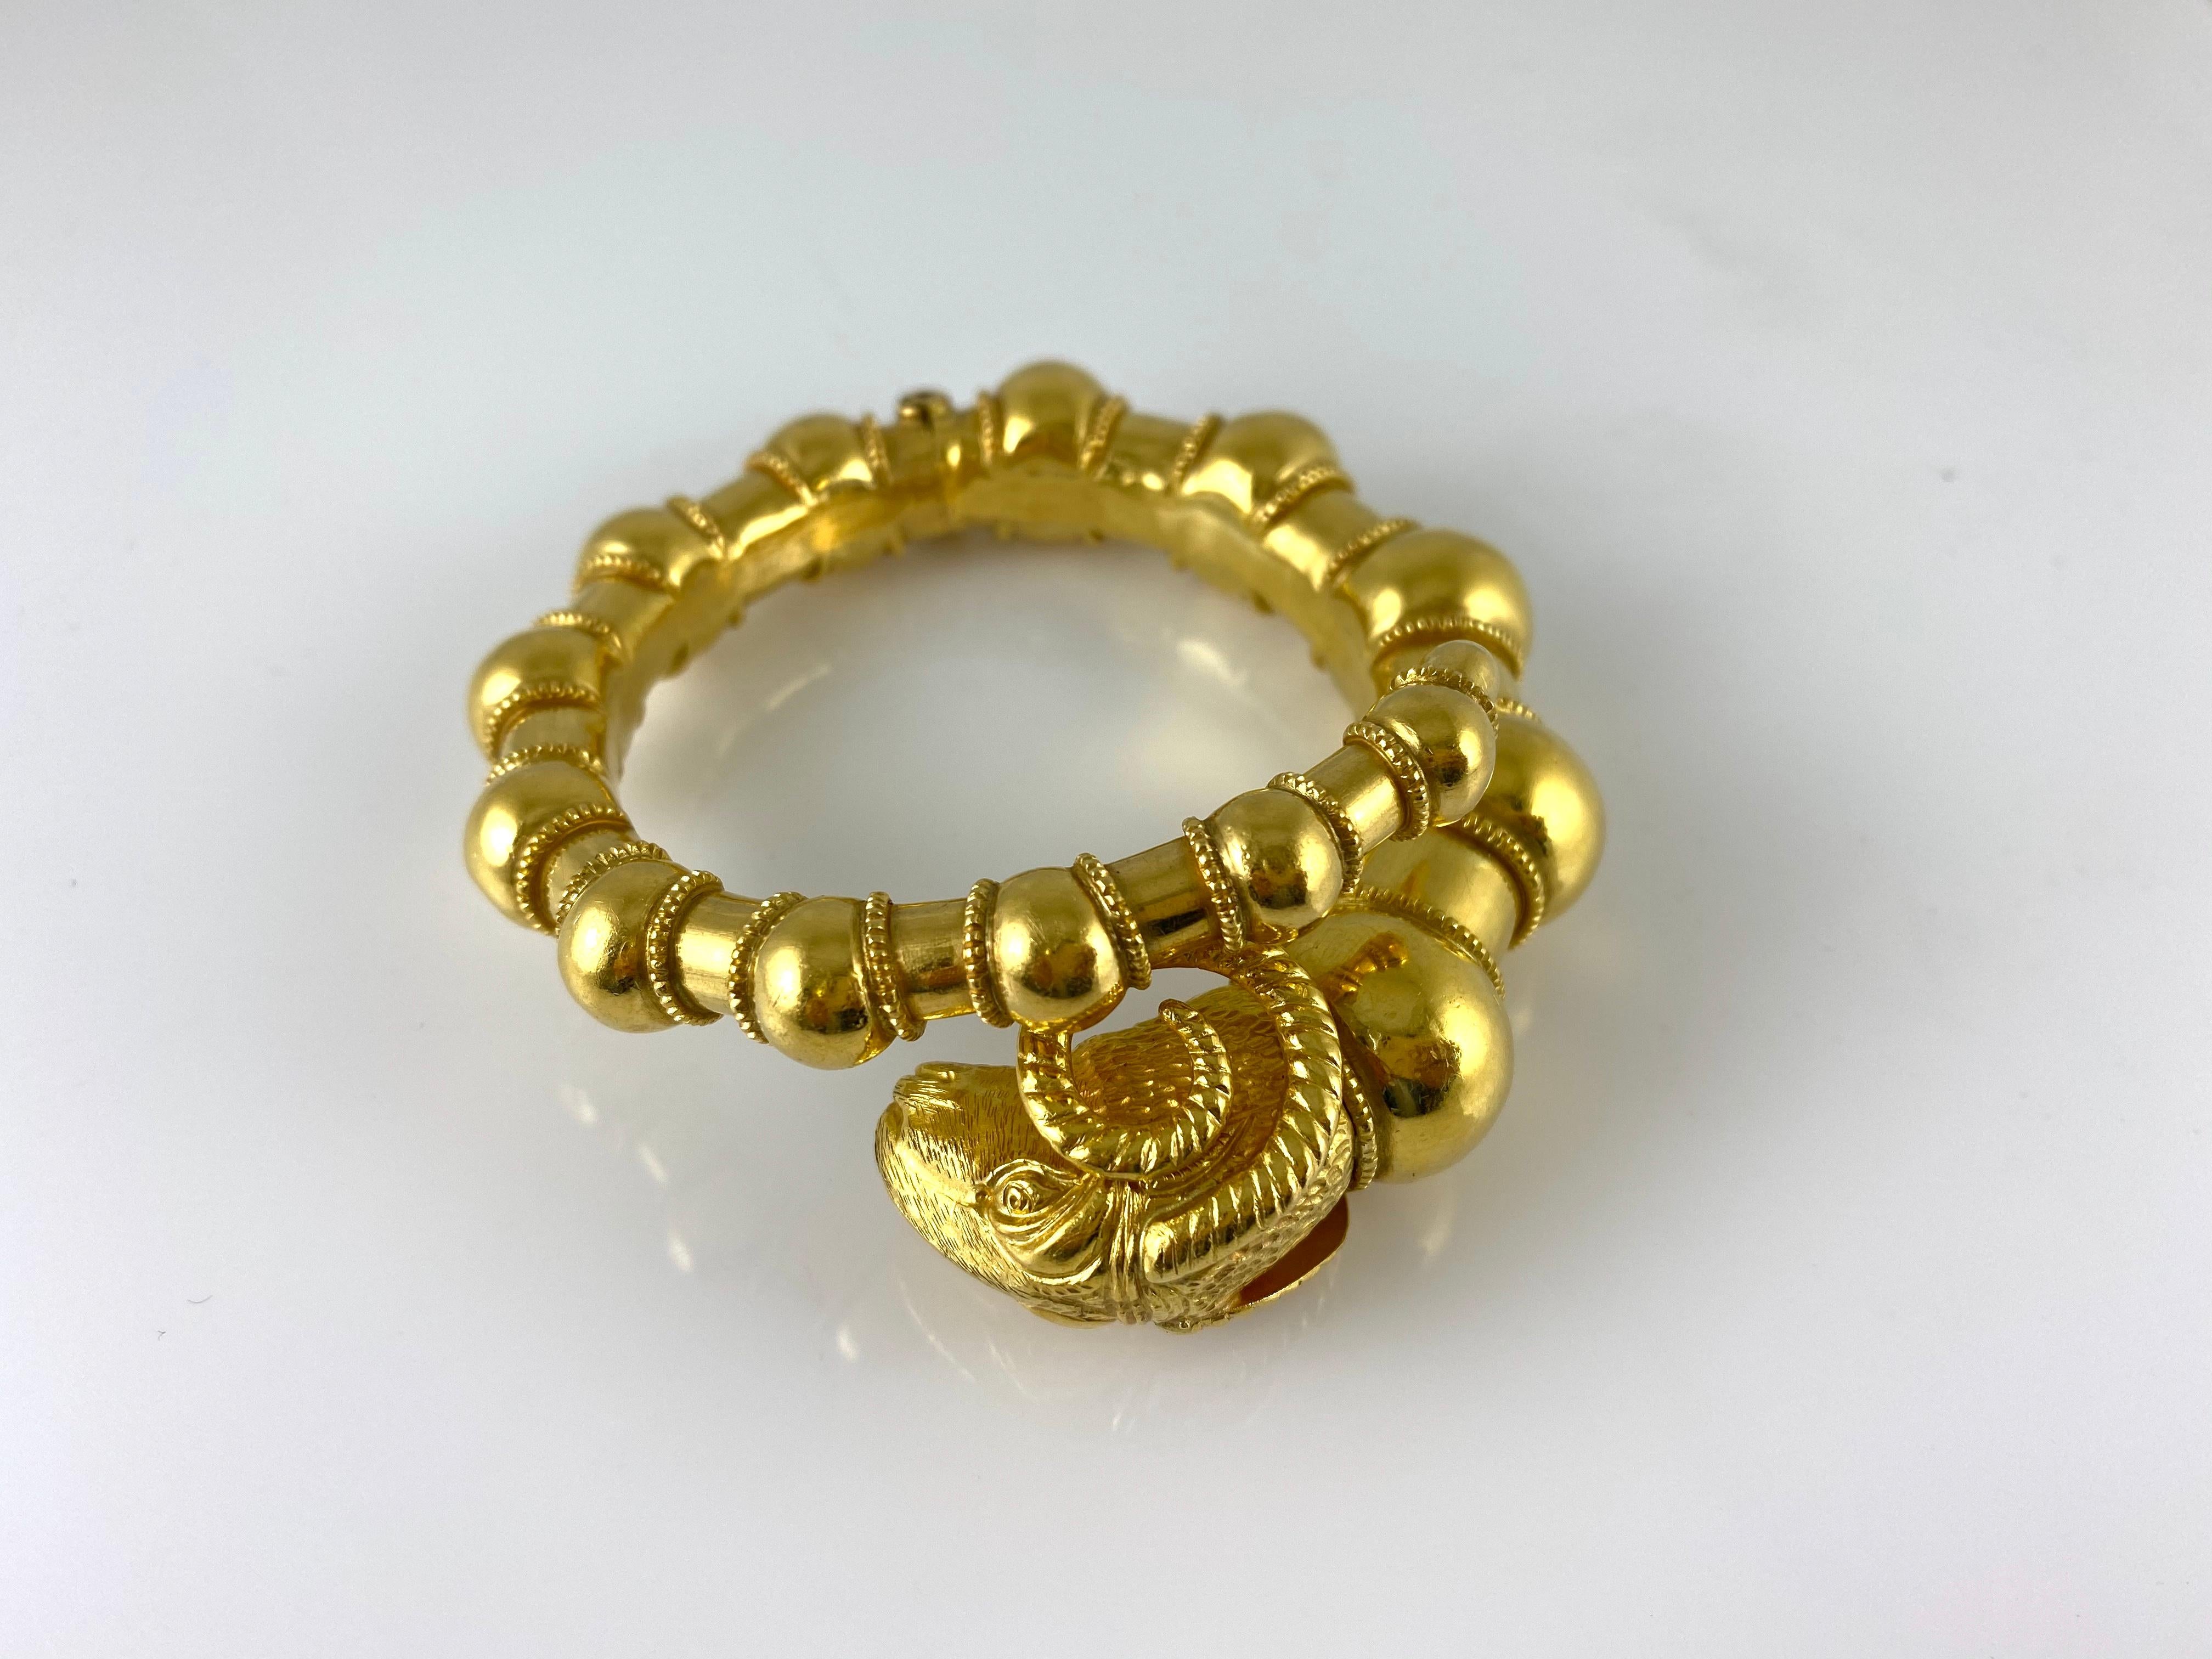 The bracelet is finely crafted in 18k yellow gold and weighing approximately total of 55.00 DWT.
Circa 1960.